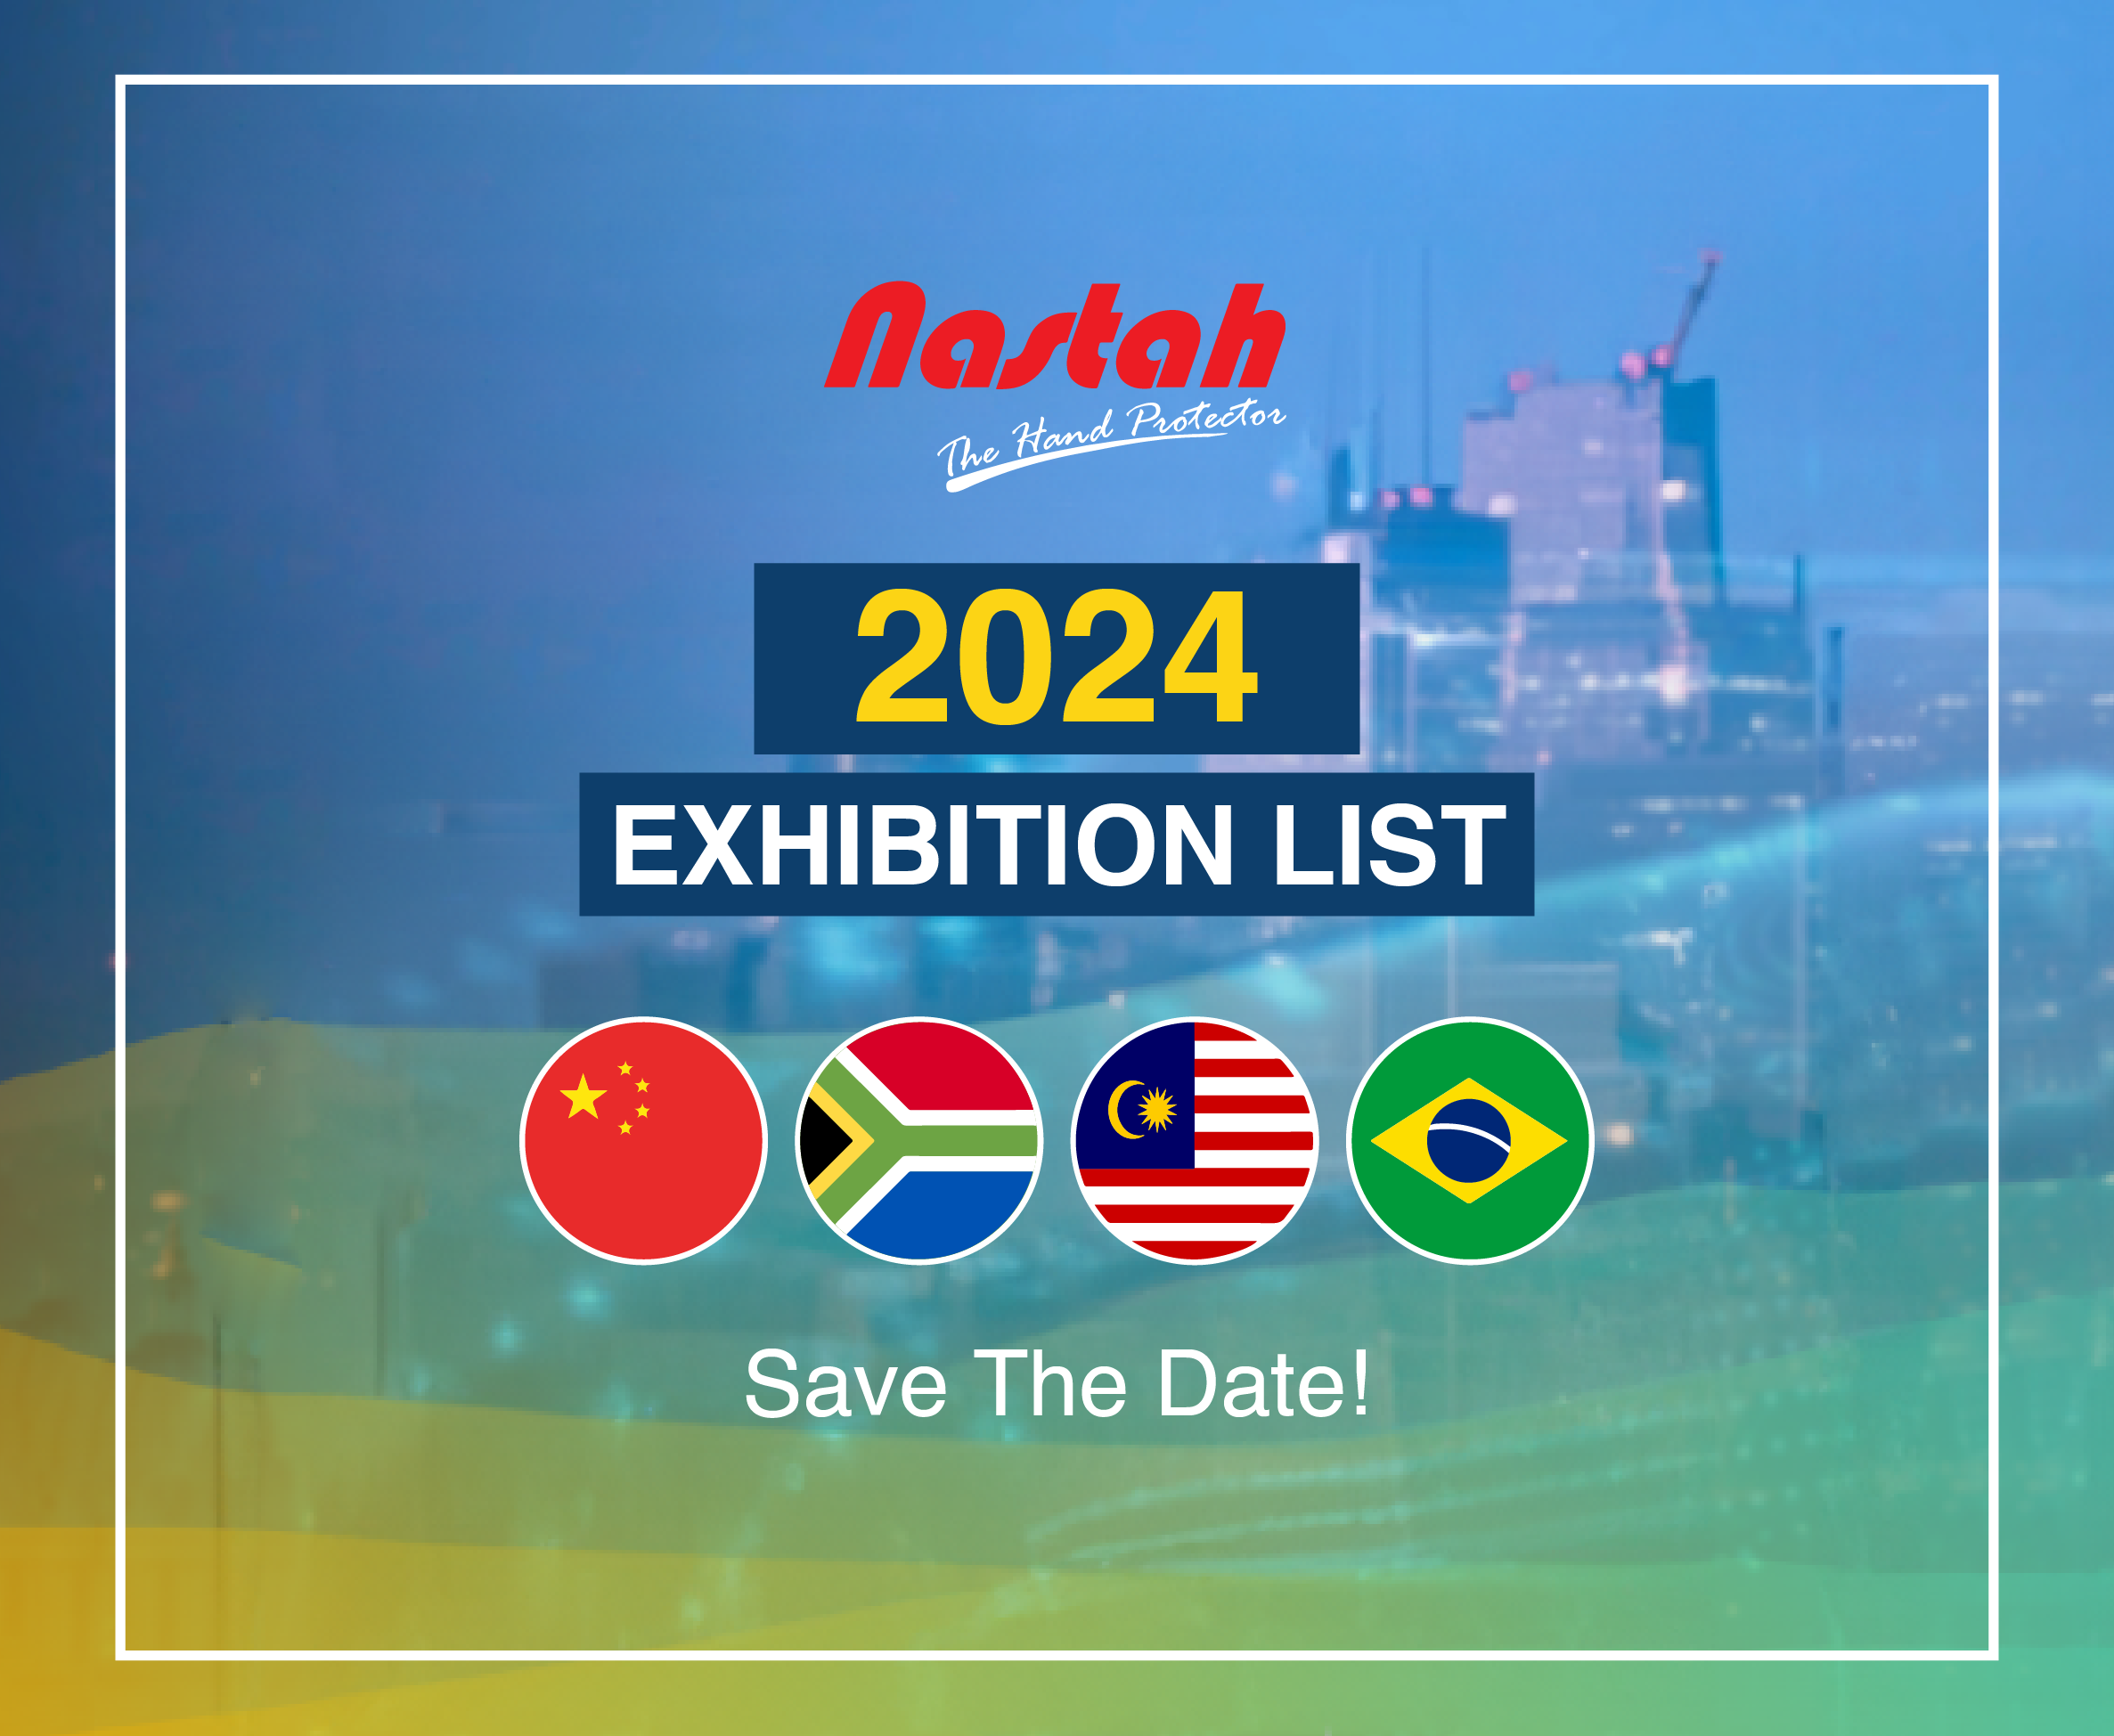 2024 Exhibition List Nastah The Hand Protector